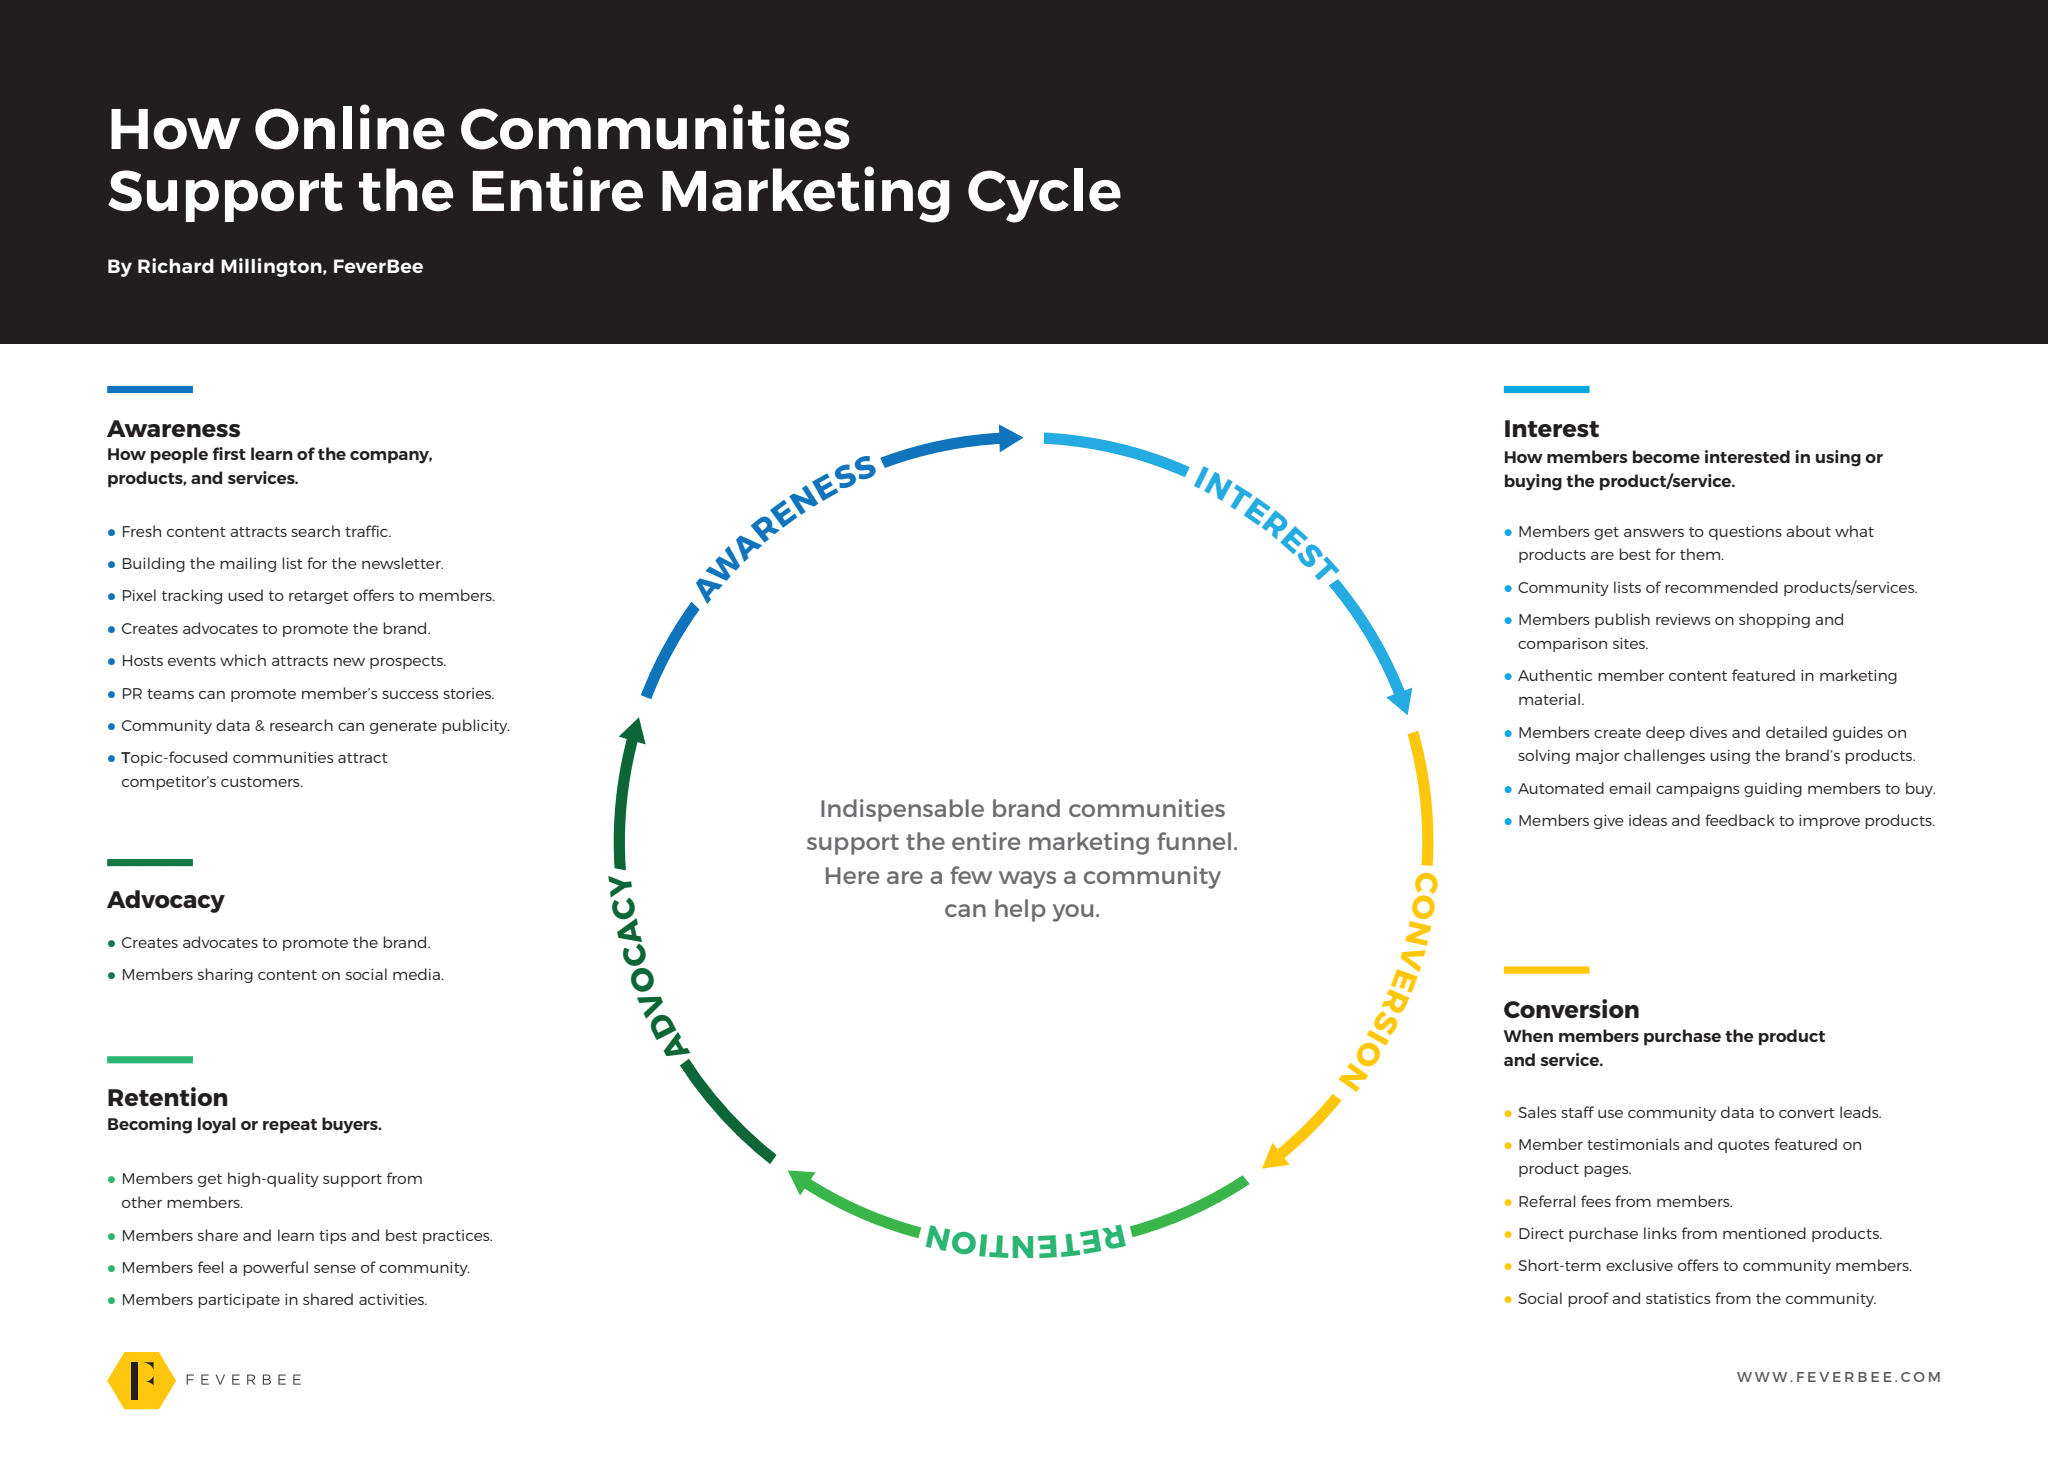 How online communities support the entire marketing cycle